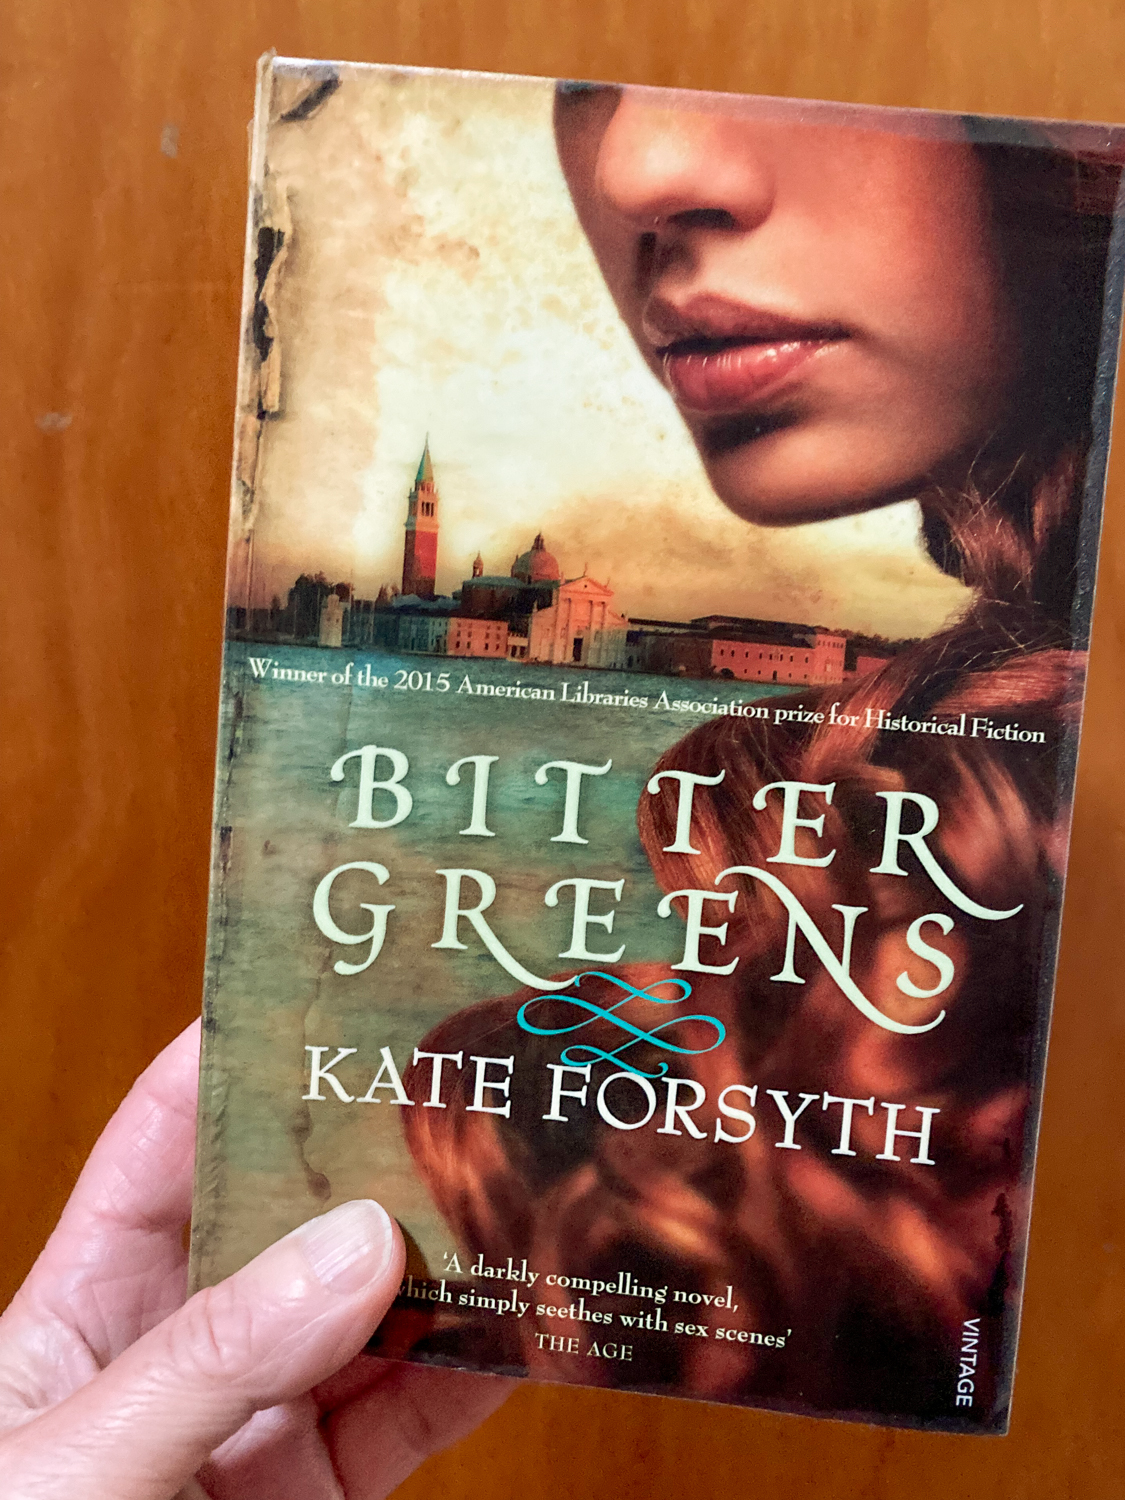 A hand holding a book title Bitter Greens by Kate Forsyth with a close up of a woman's face and red hair